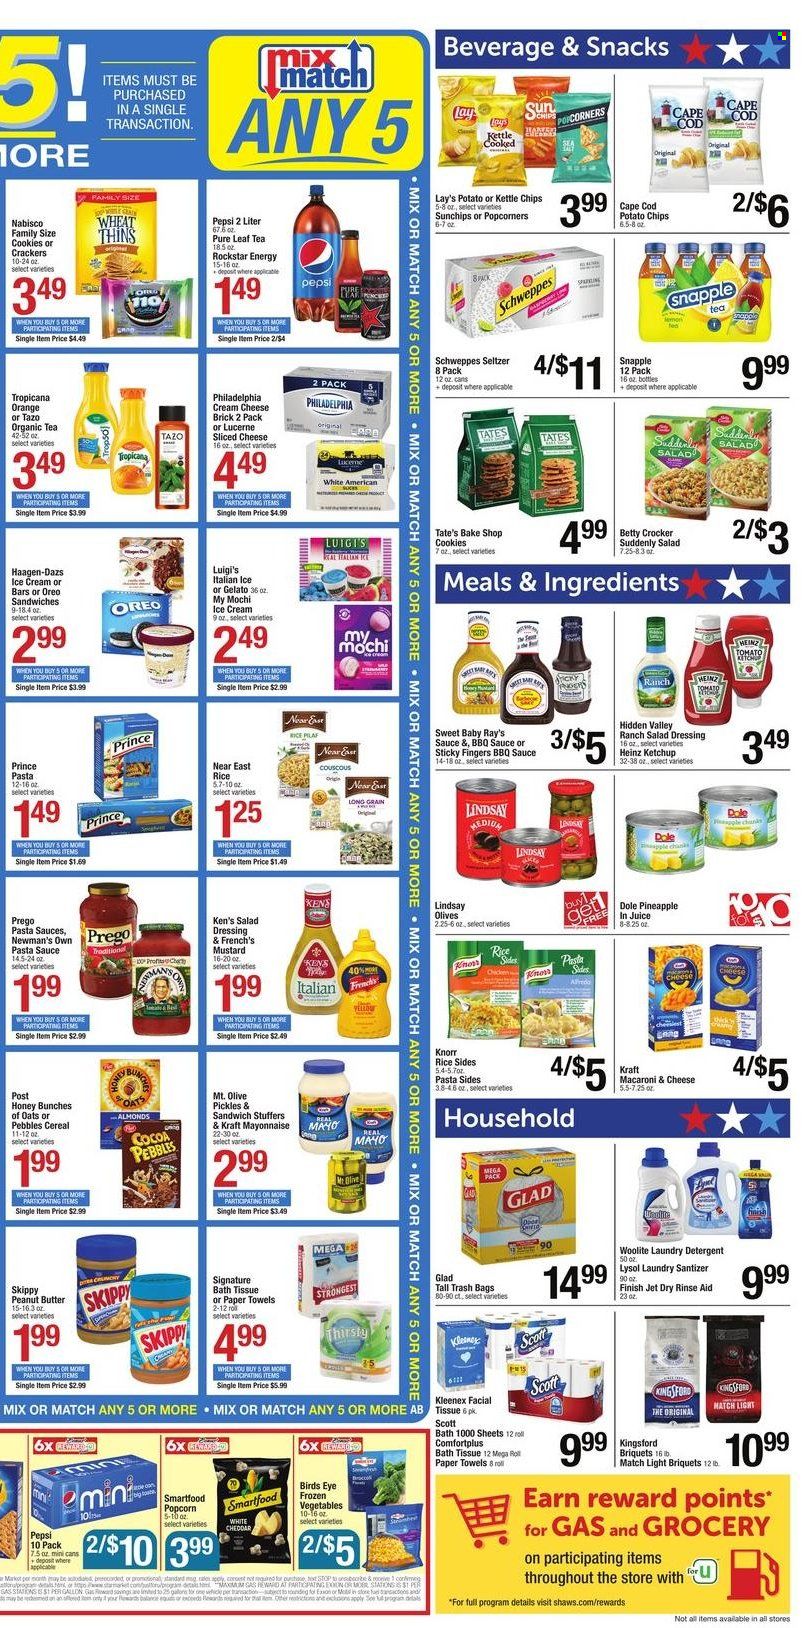 thumbnail - Shaw’s Flyer - 05/27/2022 - 06/02/2022 - Sales products - Dole, pineapple, oranges, cod, macaroni & cheese, pasta sauce, sandwich, Knorr, Bird's Eye, pasta sides, Kraft®, cream cheese, sliced cheese, Philadelphia, Oreo, mayonnaise, Häagen-Dazs, gelato, frozen vegetables, cookies, snack, crackers, potato chips, Lay’s, Smartfood, Thins, popcorn, Heinz, pickles, olives, cereals, couscous, rice, BBQ sauce, mustard, salad dressing, ketchup, dressing, peanut butter, Schweppes, Pepsi, juice, Snapple, Rockstar, seltzer water, tea, Pure Leaf, bath tissue, Kleenex, Scott, kitchen towels, paper towels, detergent, Lysol, Woolite, laundry detergent, Jet, bag, trash bags. Page 3.